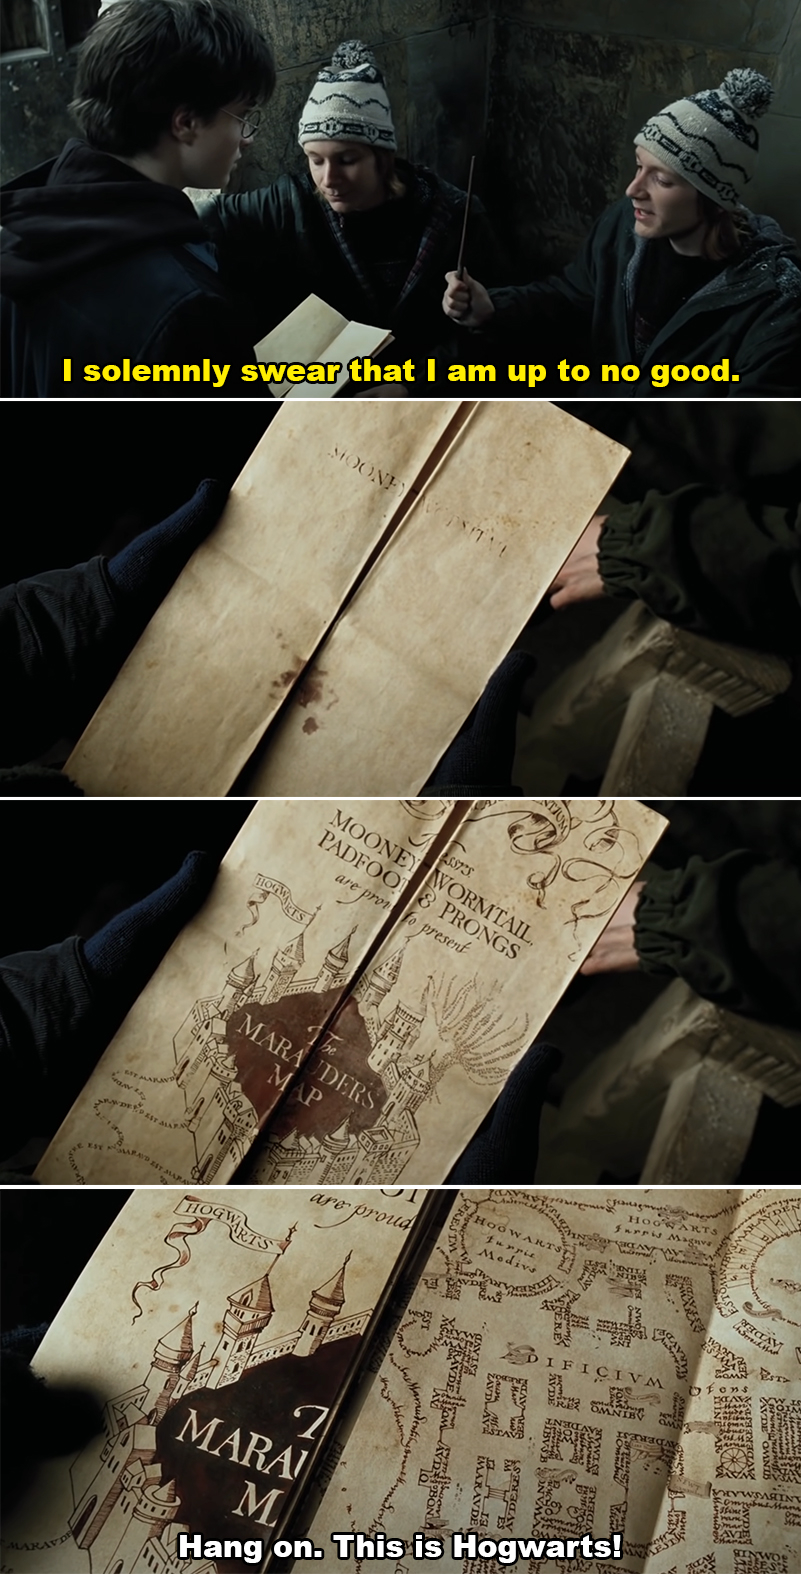 Harry Potter shows Marauder&#x27;s Map to Hermione and Ron, who look intrigued. The map is detailed with room names and footprints